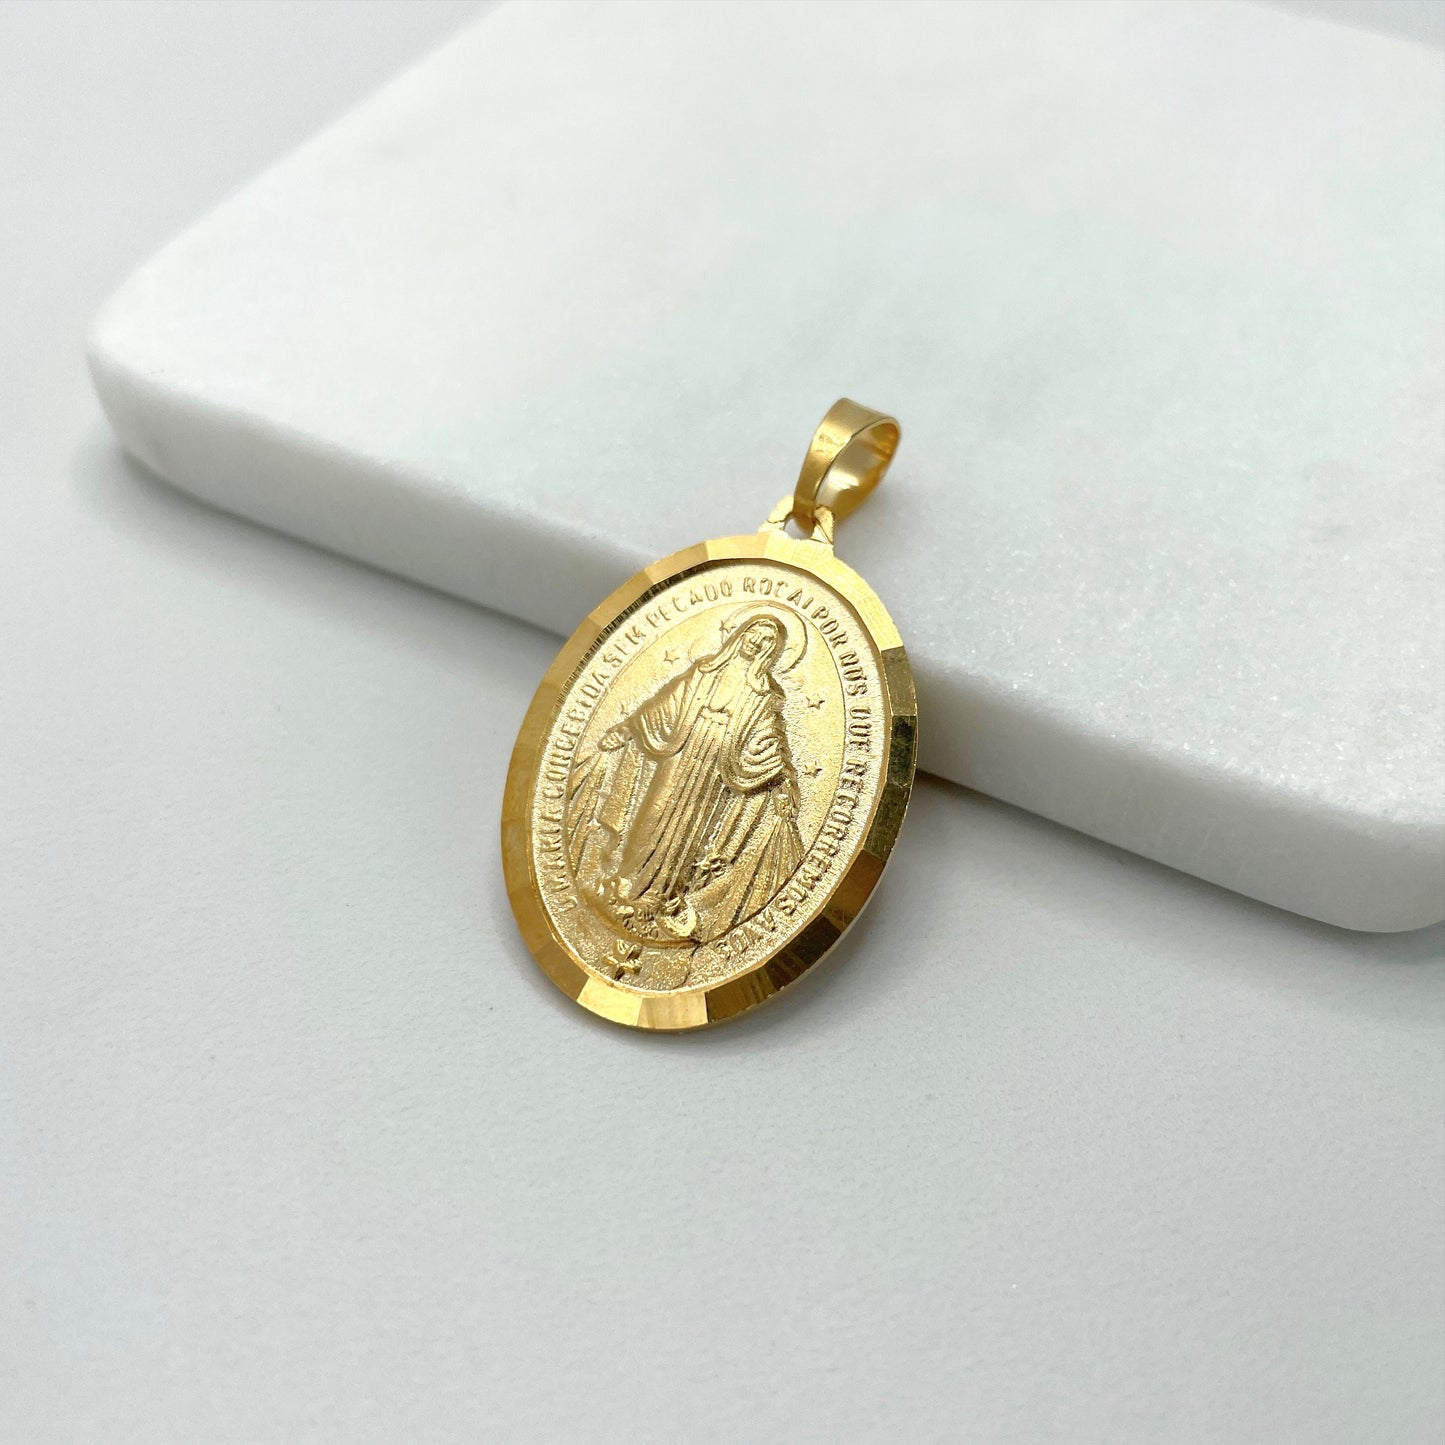 18k Gold Filled Our Lady of Guadalupe (Virgen de Guadalupe) 1.6 inches Charms Pendant, Wholesale Jewelry Making Supplies